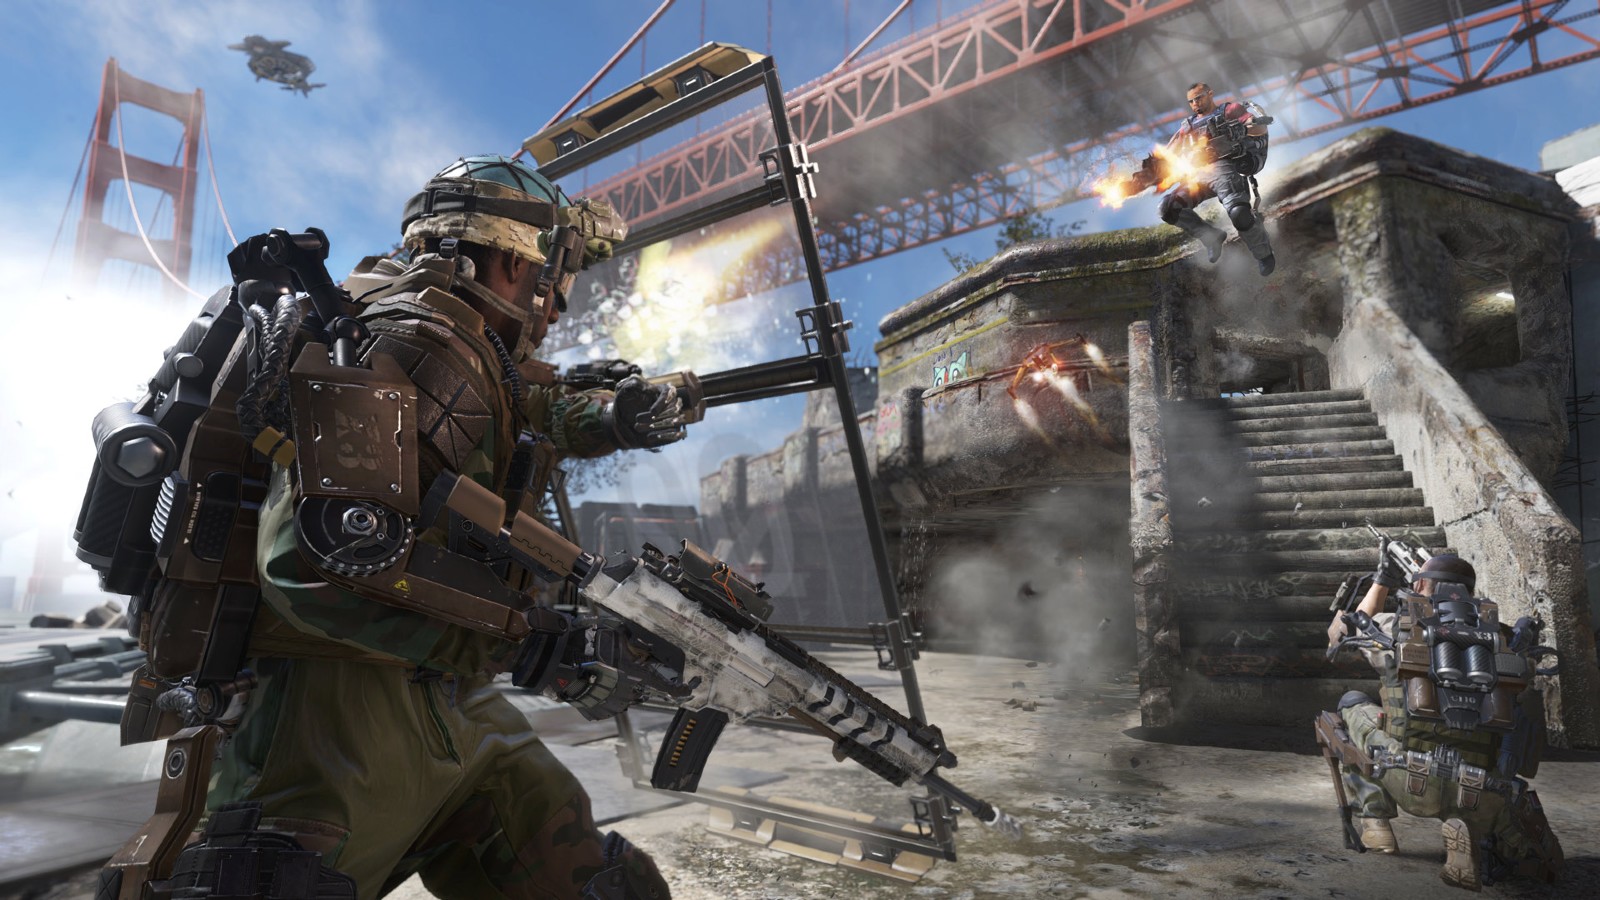 Report: Call of Duty 2023 will be a full game set in Modern Warfare universe